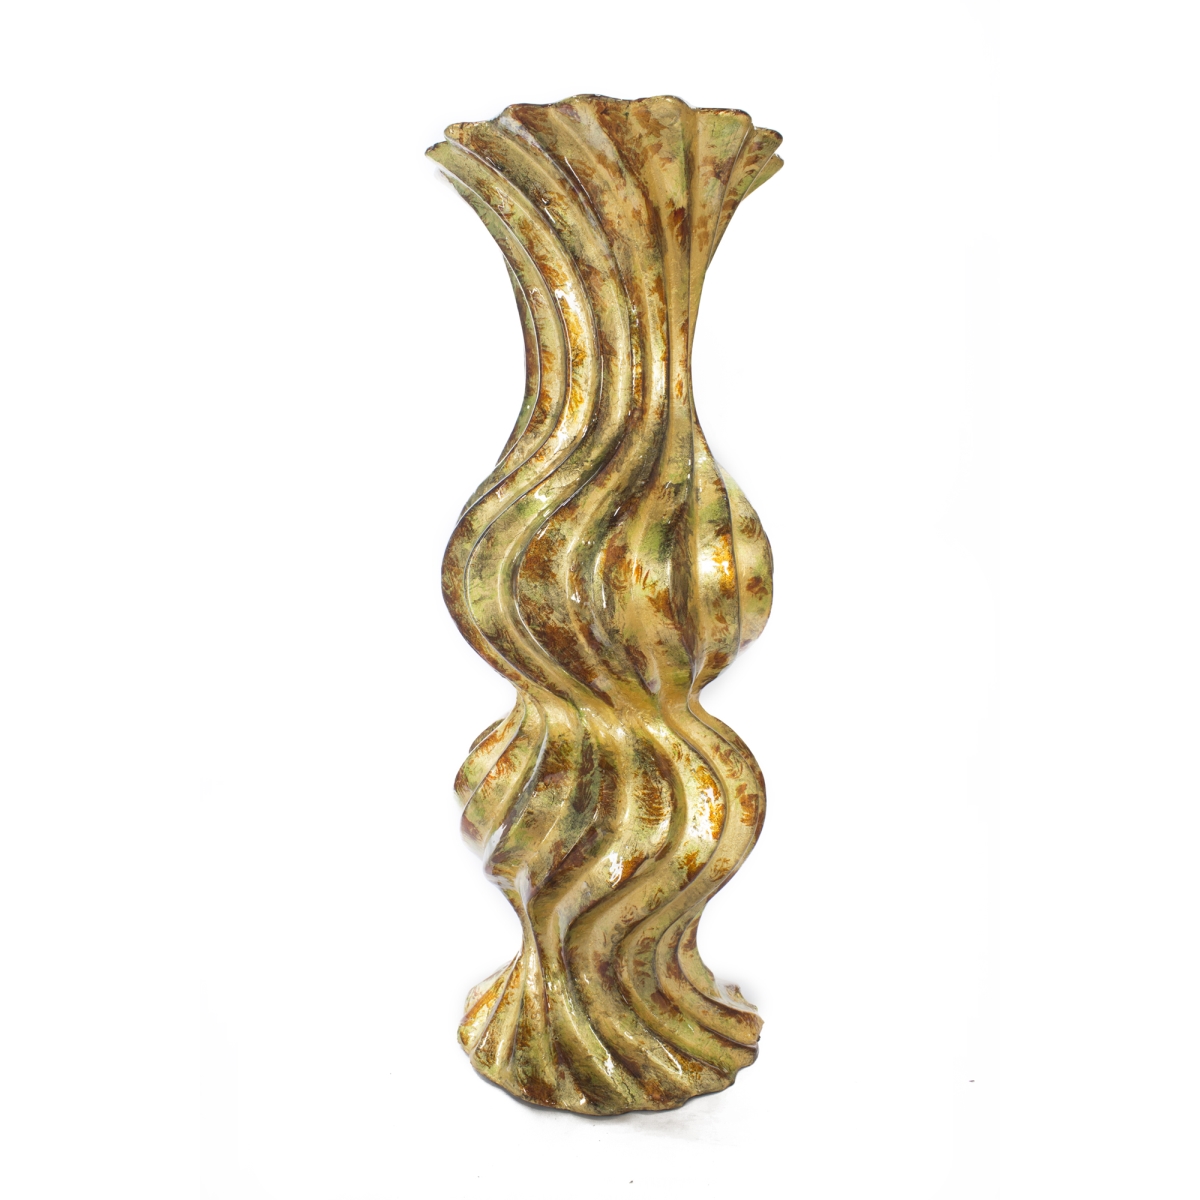 W137803-230 Kimber Foiled & Lacquered Ceramic Textured Vase